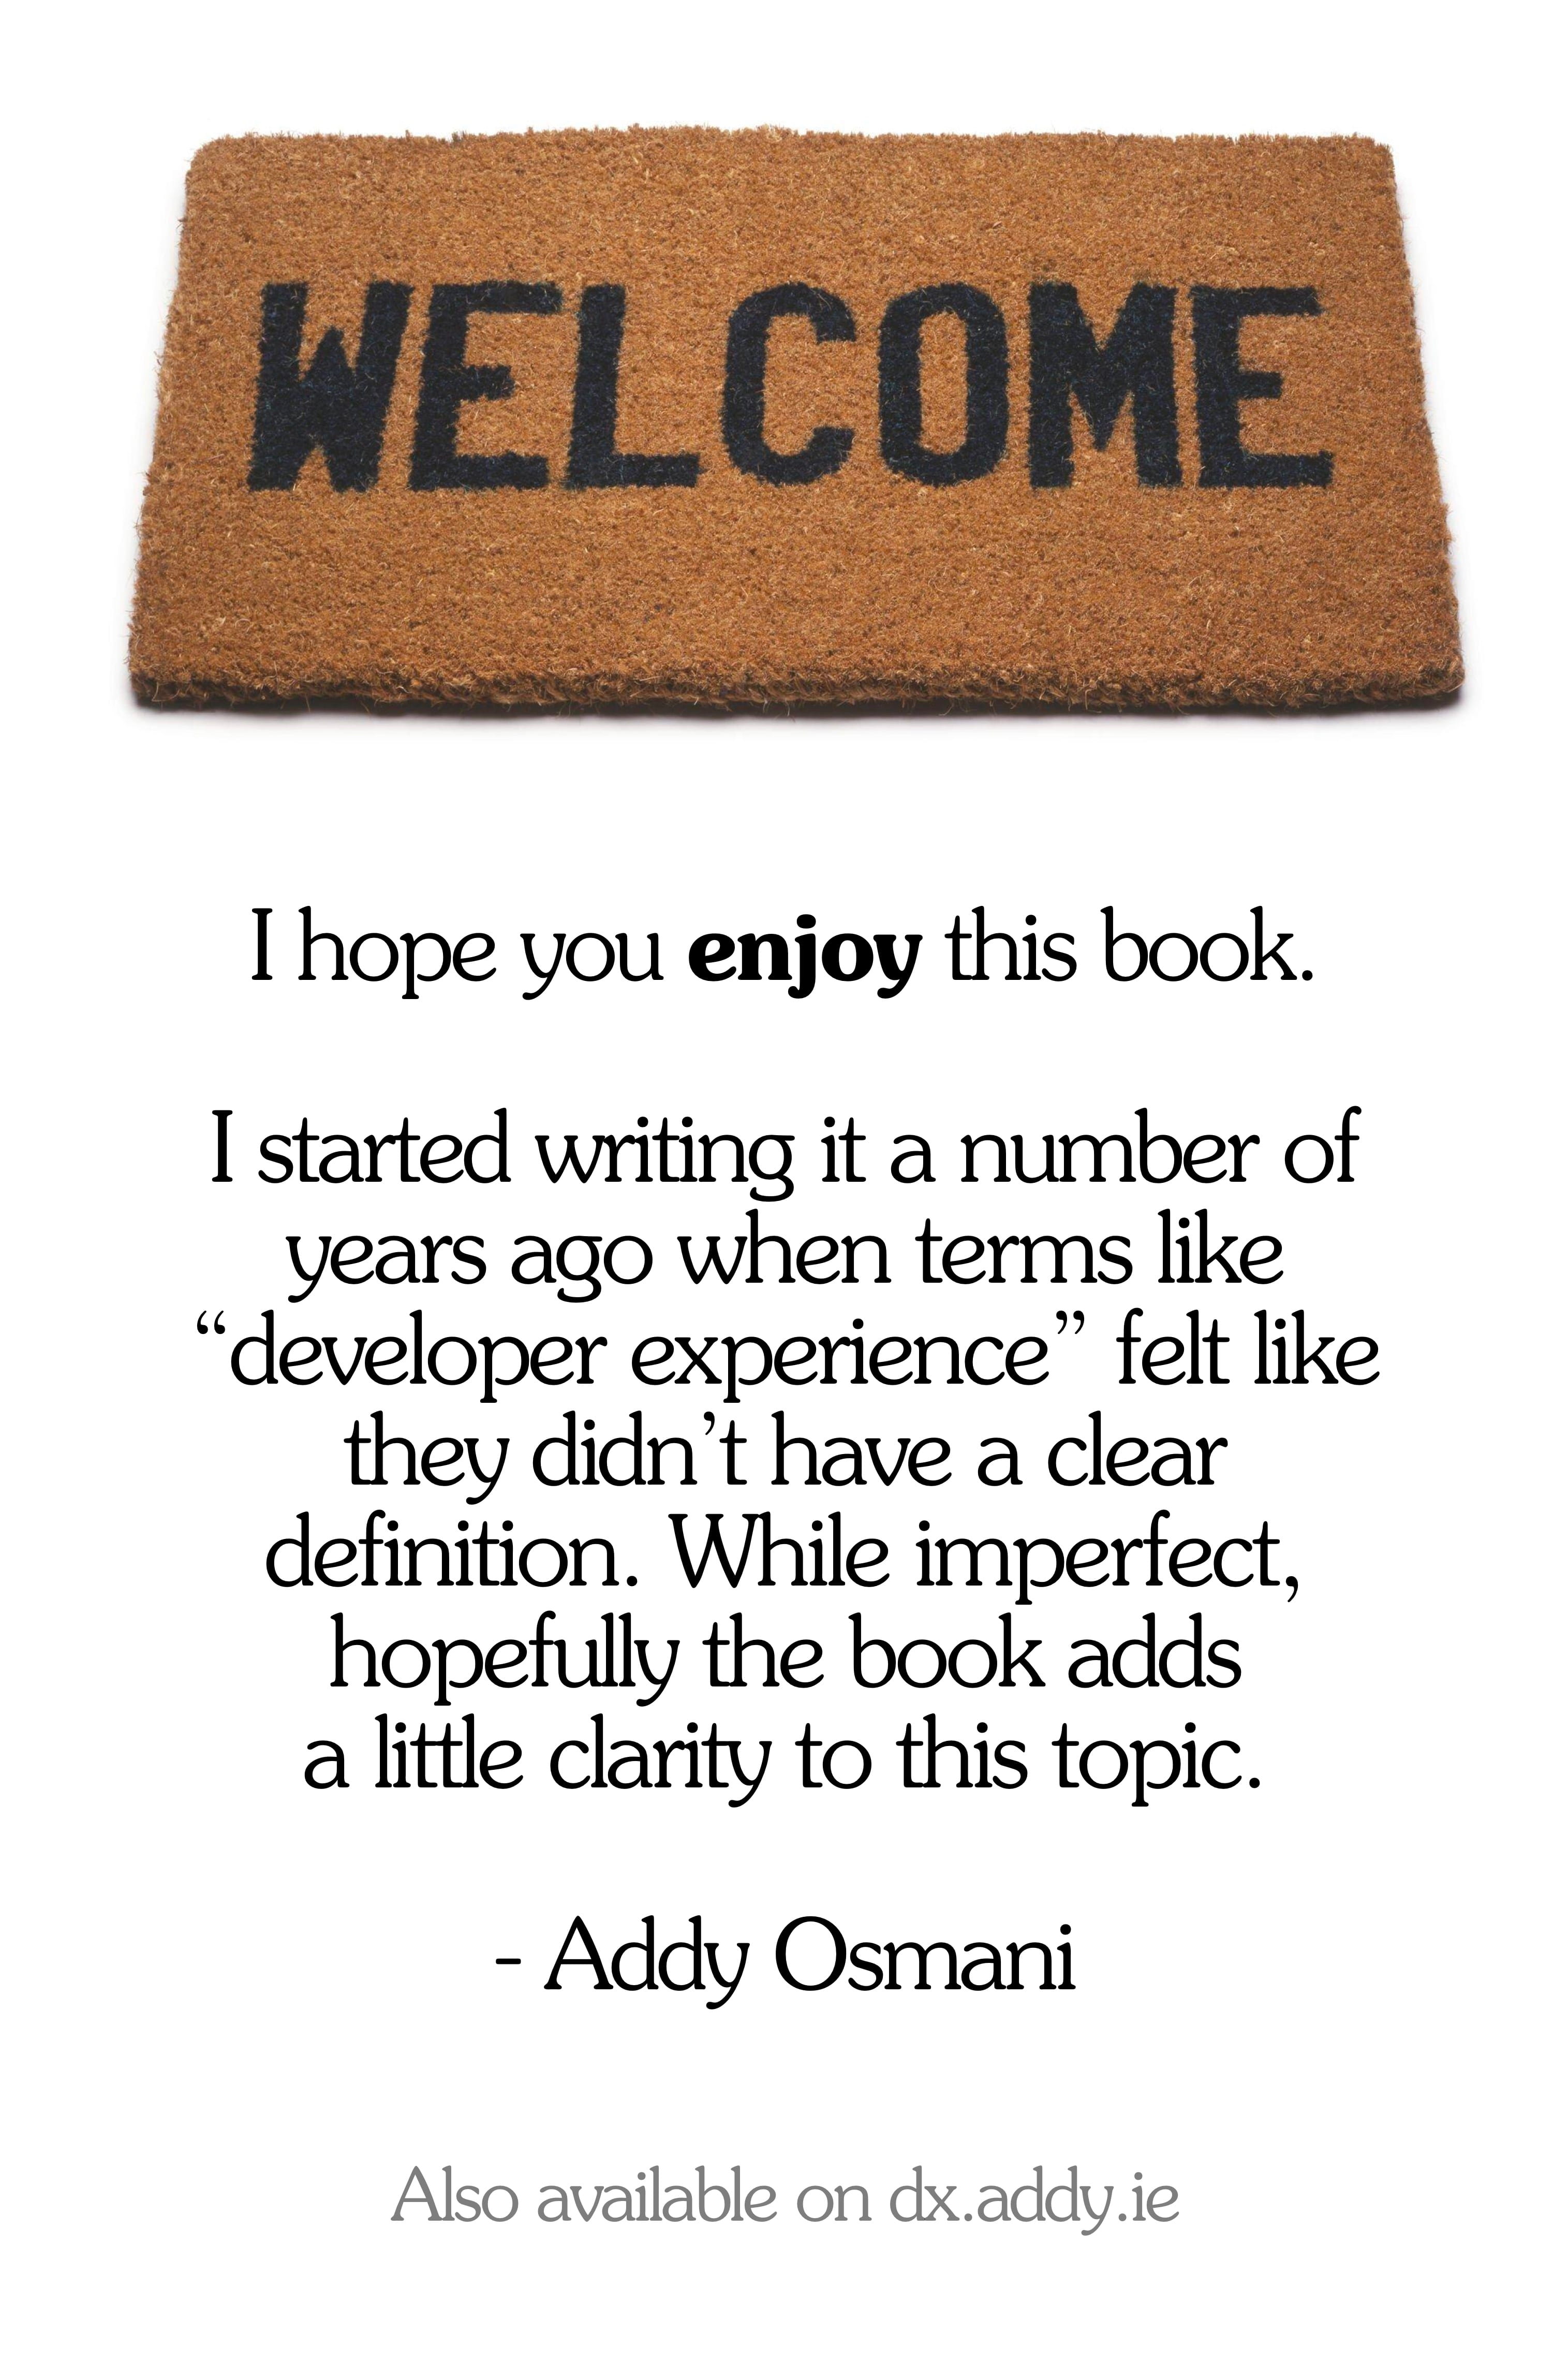 I hope you enjoy this book. I started writing it a number of years ago when terms like developer experience felt like they didnt have a clear definition. While imperfect,  hopefully the book adds a little clarity to this topic.- Addy Osmani